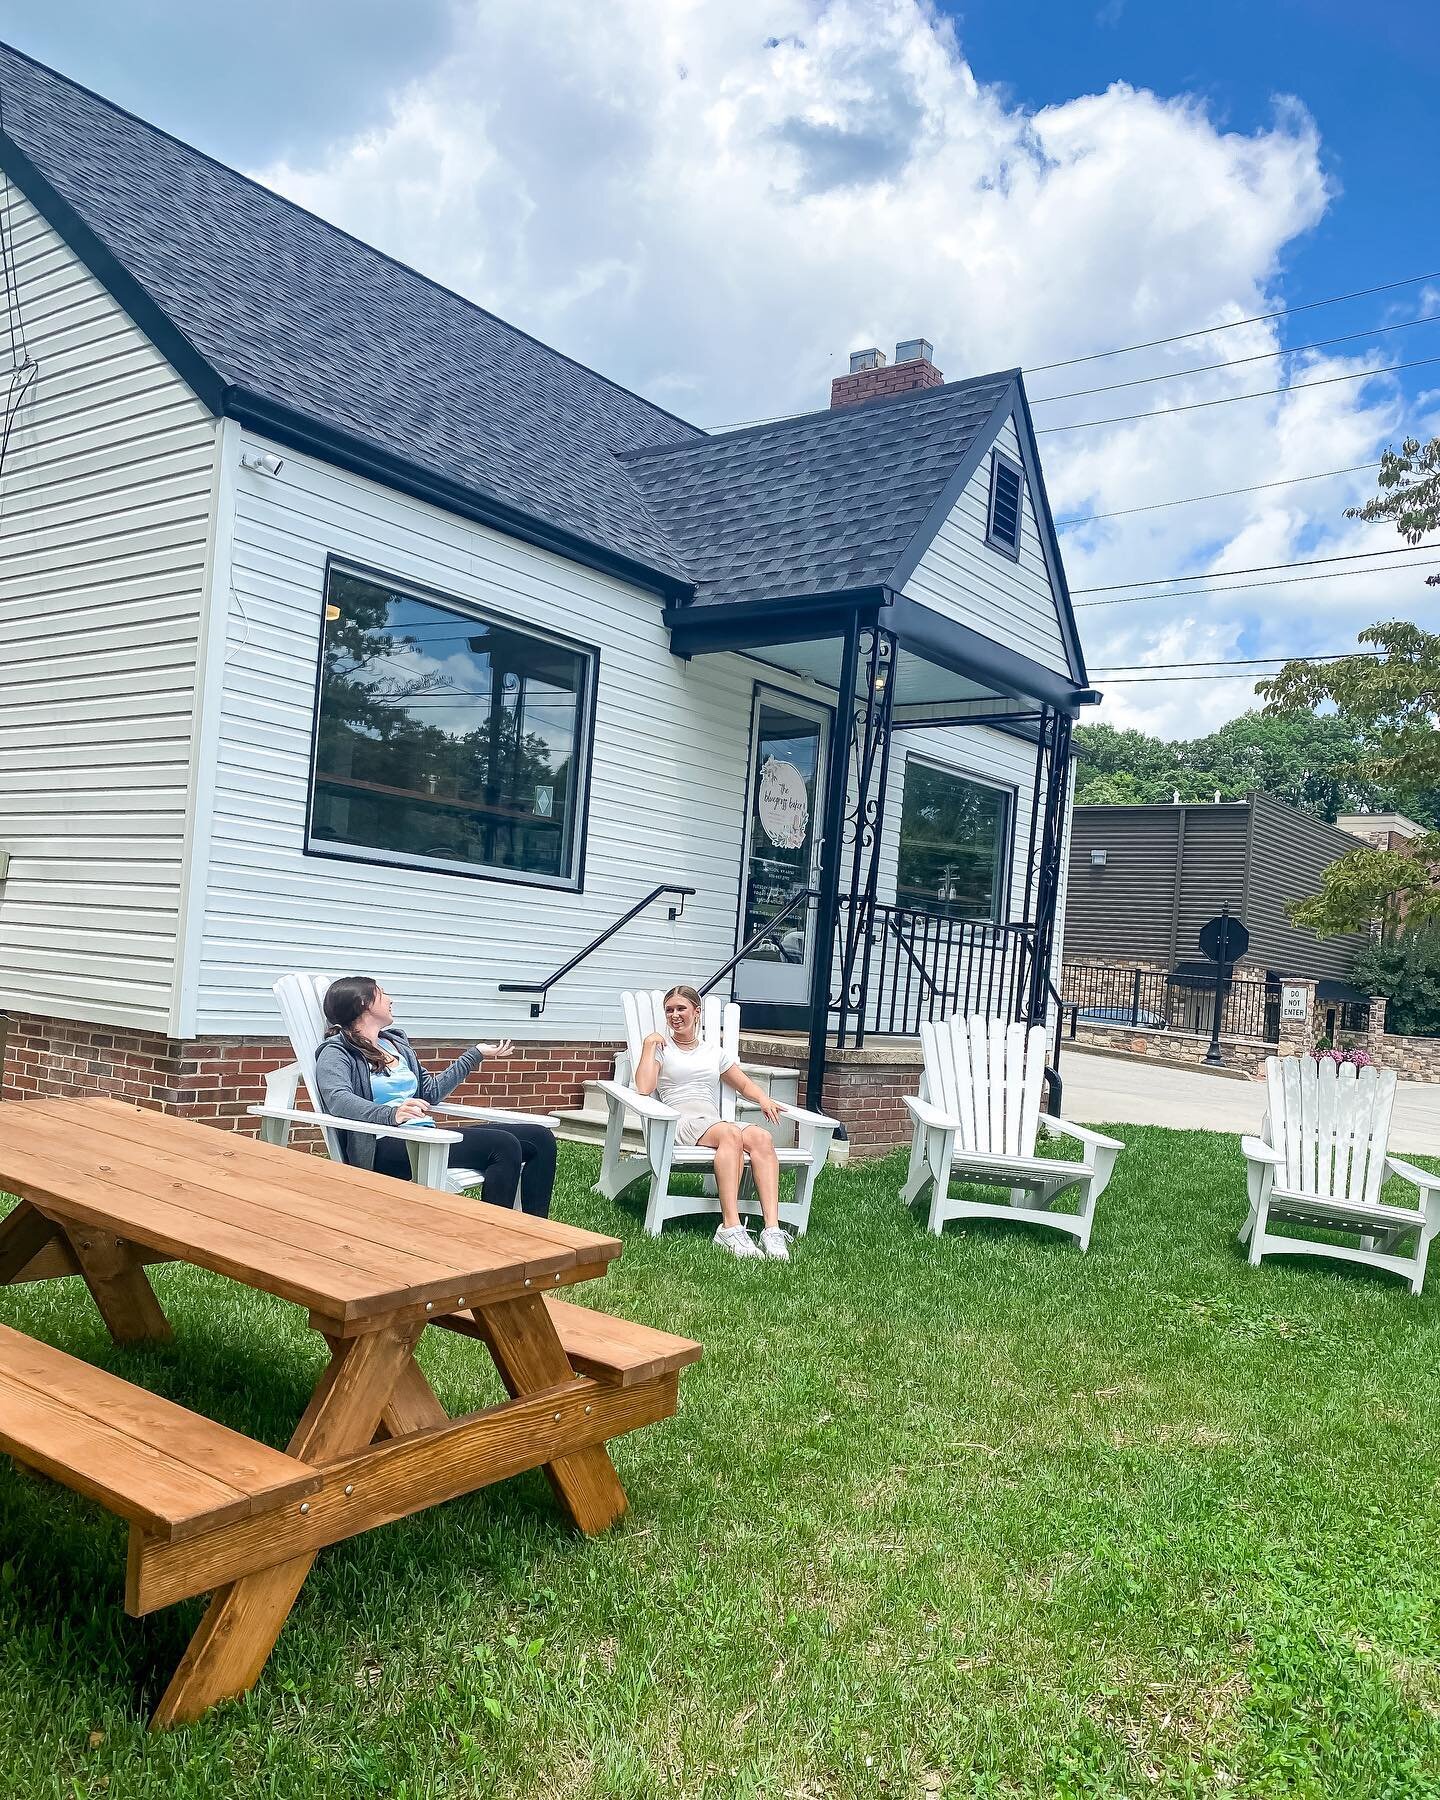 Guess who has outdoor seating?! Your favorite bakery, duh! Thanks to my sweet papaw (in the 3rd pic), I have beautiful adirondack chairs and picnic table ready for you to enjoy your treats! Seriously it&rsquo;s the best view too. 💙💙